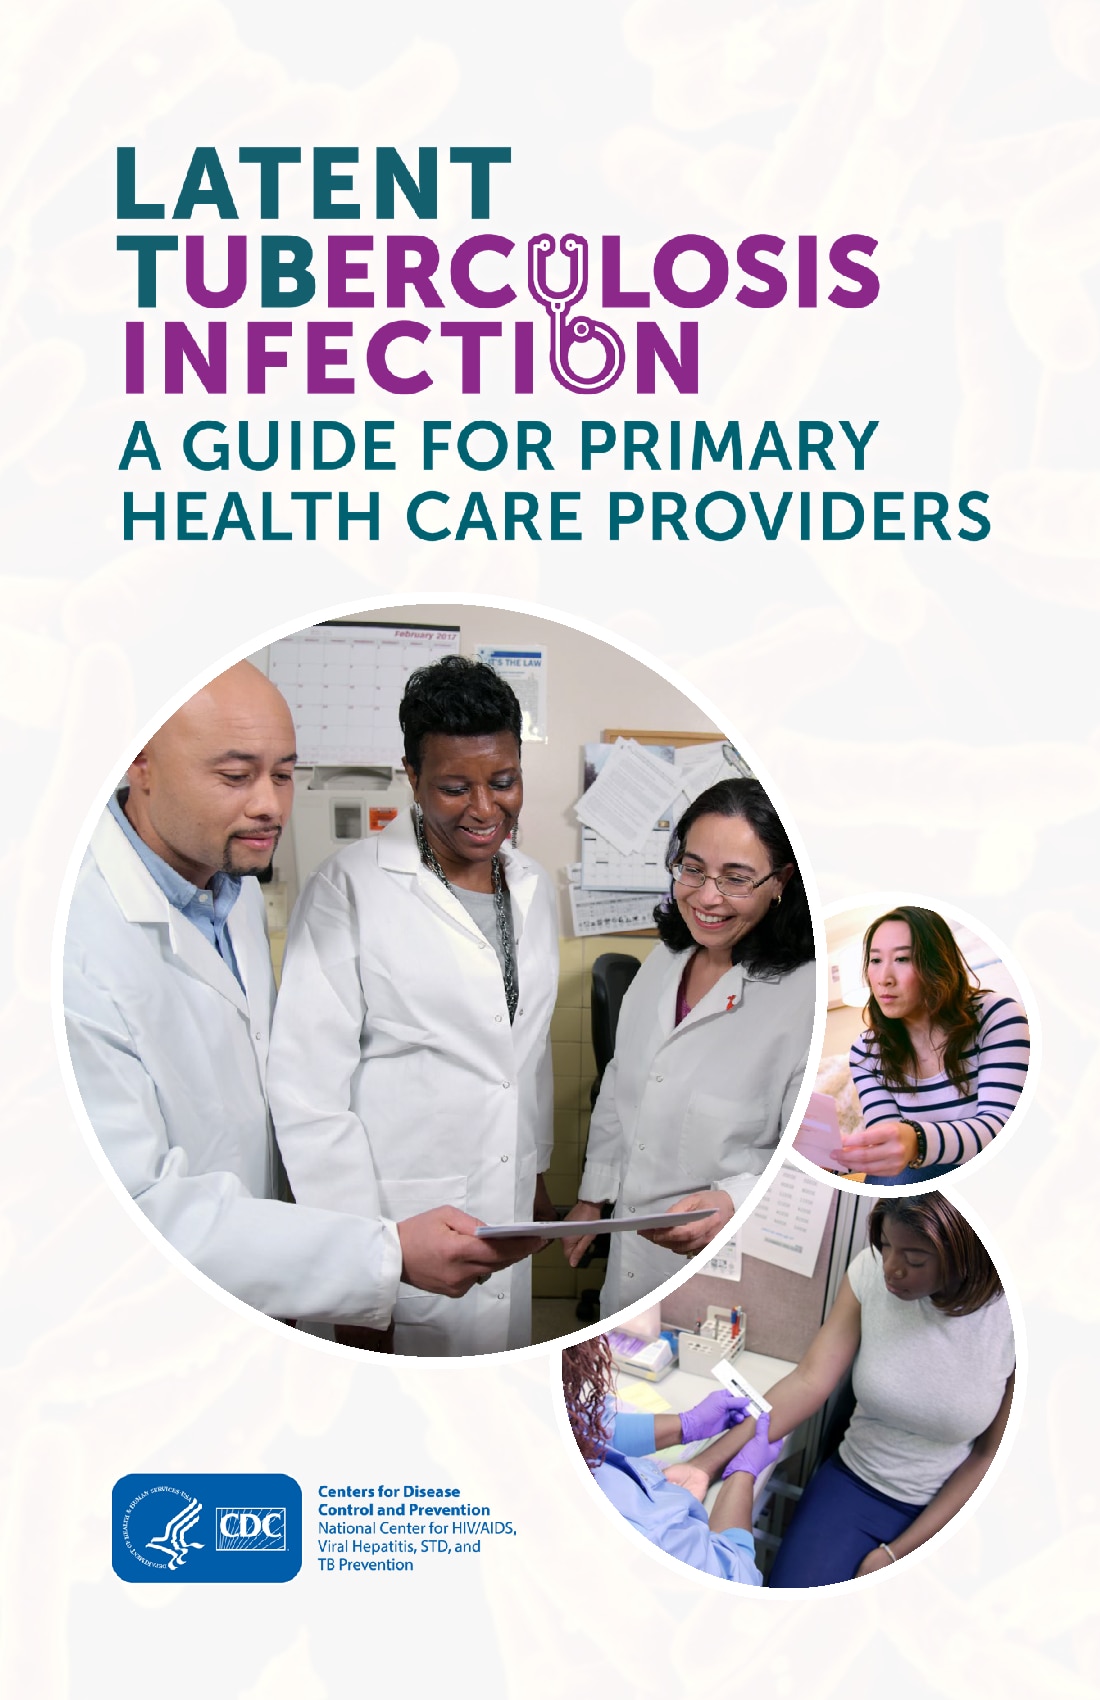 Latent Tuberculosis Infection: A Guide for Primary Health Care Providers